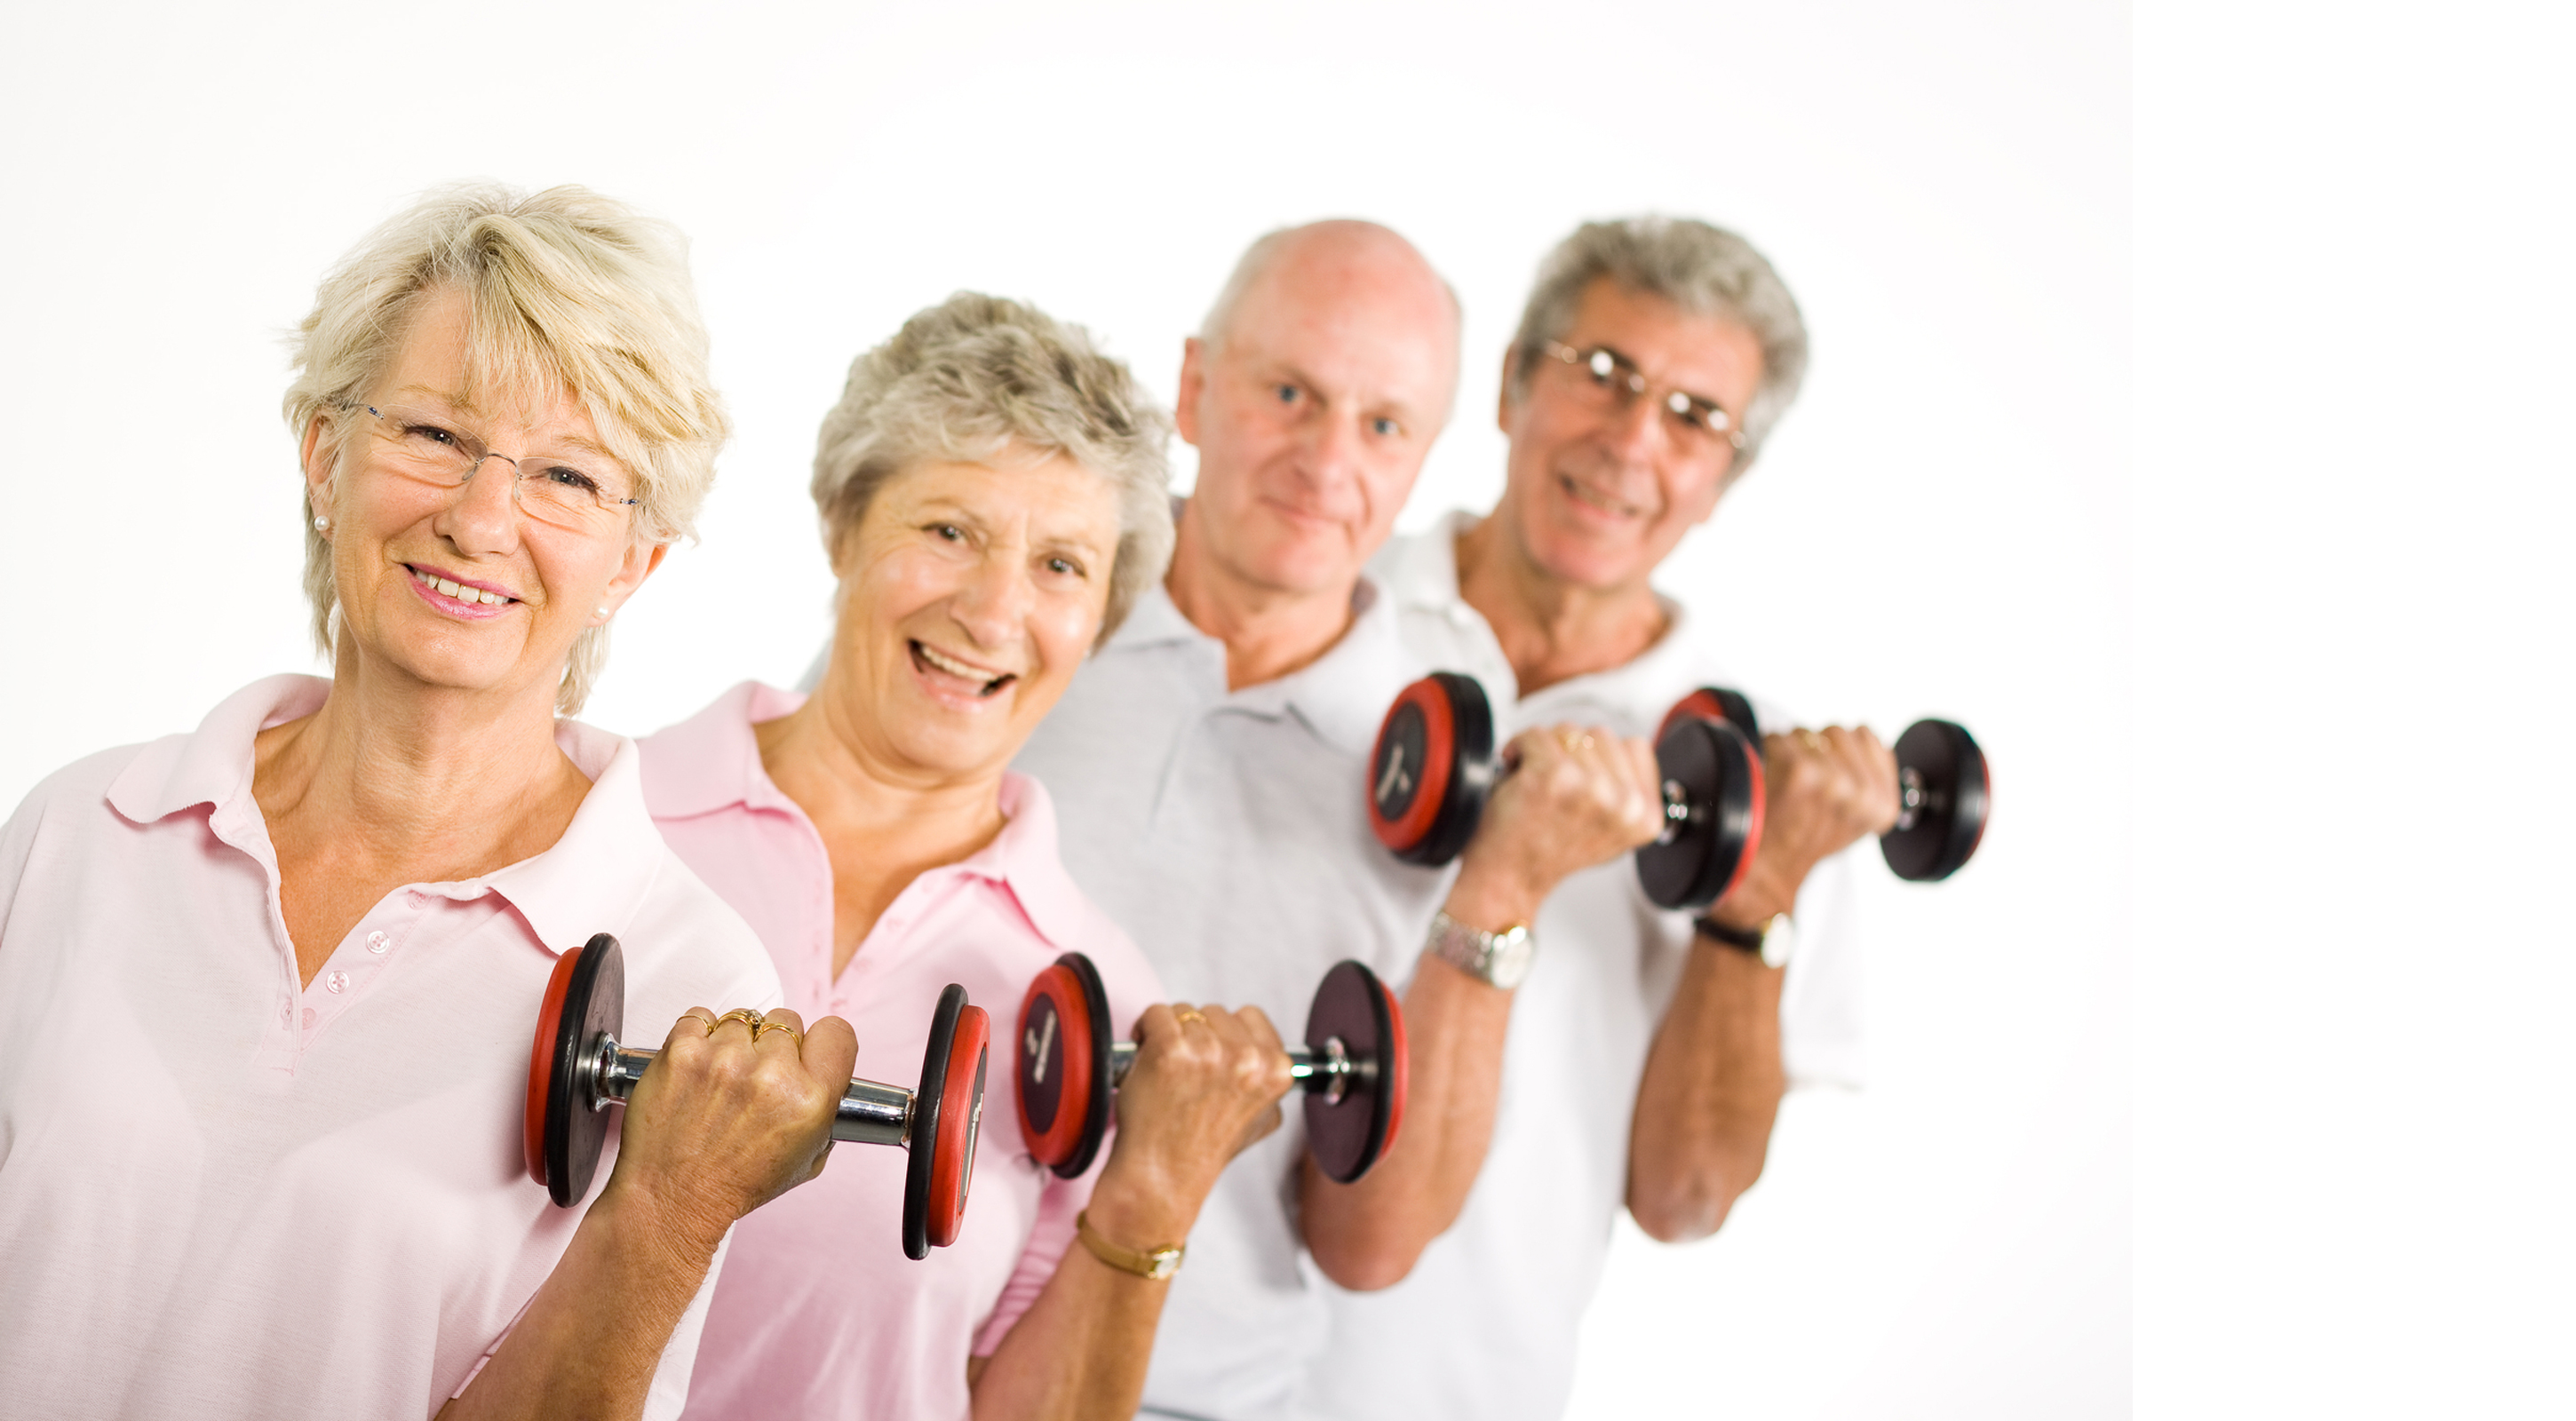 beneficial Williamson exercise for osteoporosis